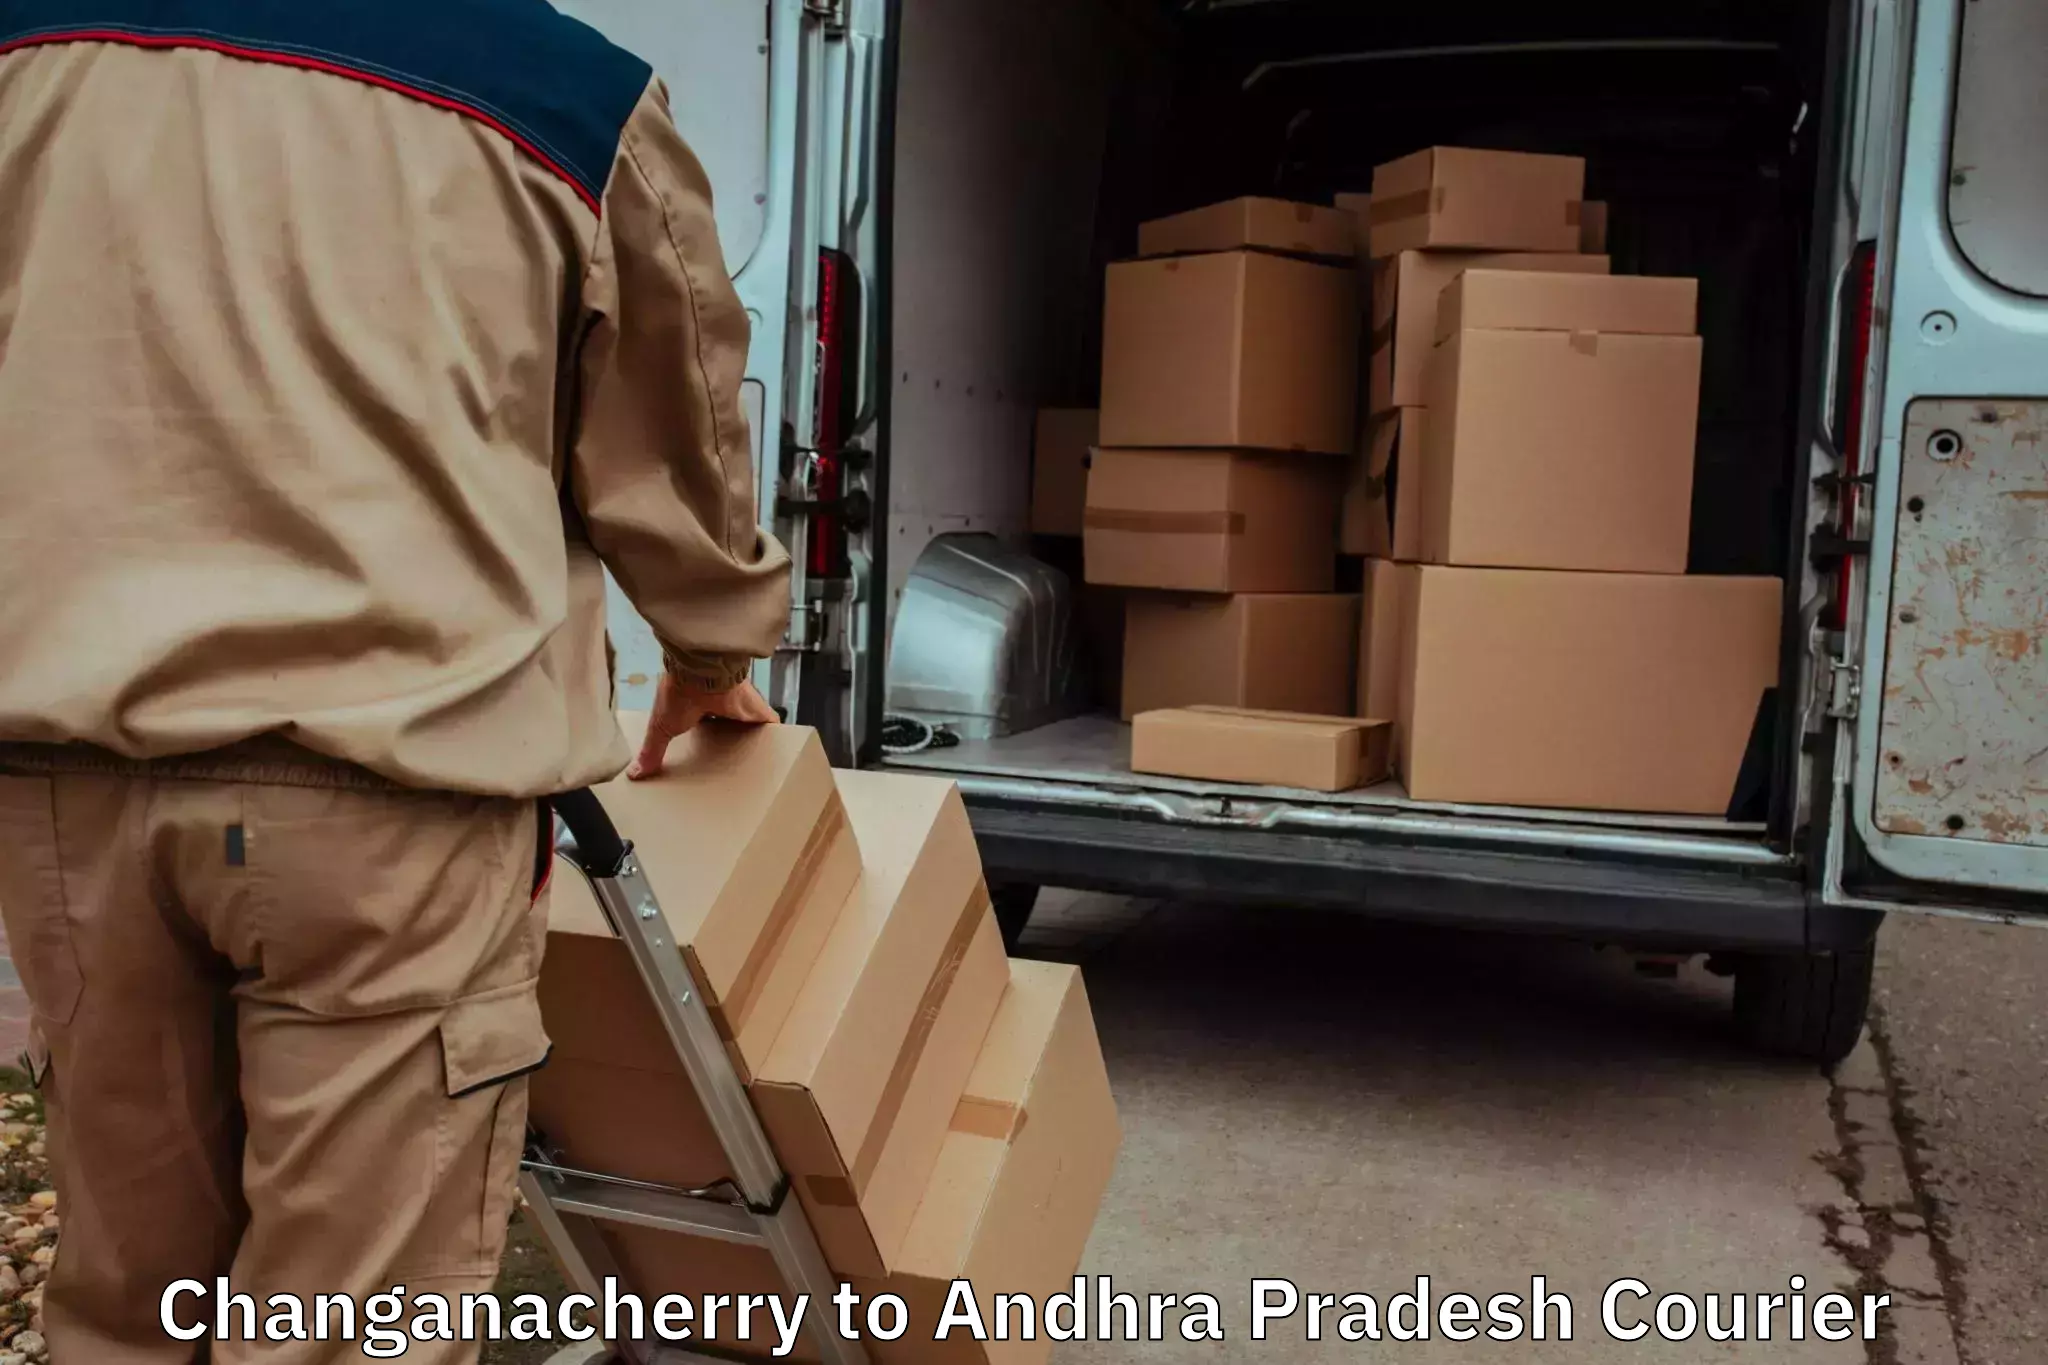 Quality relocation services in Changanacherry to Martur